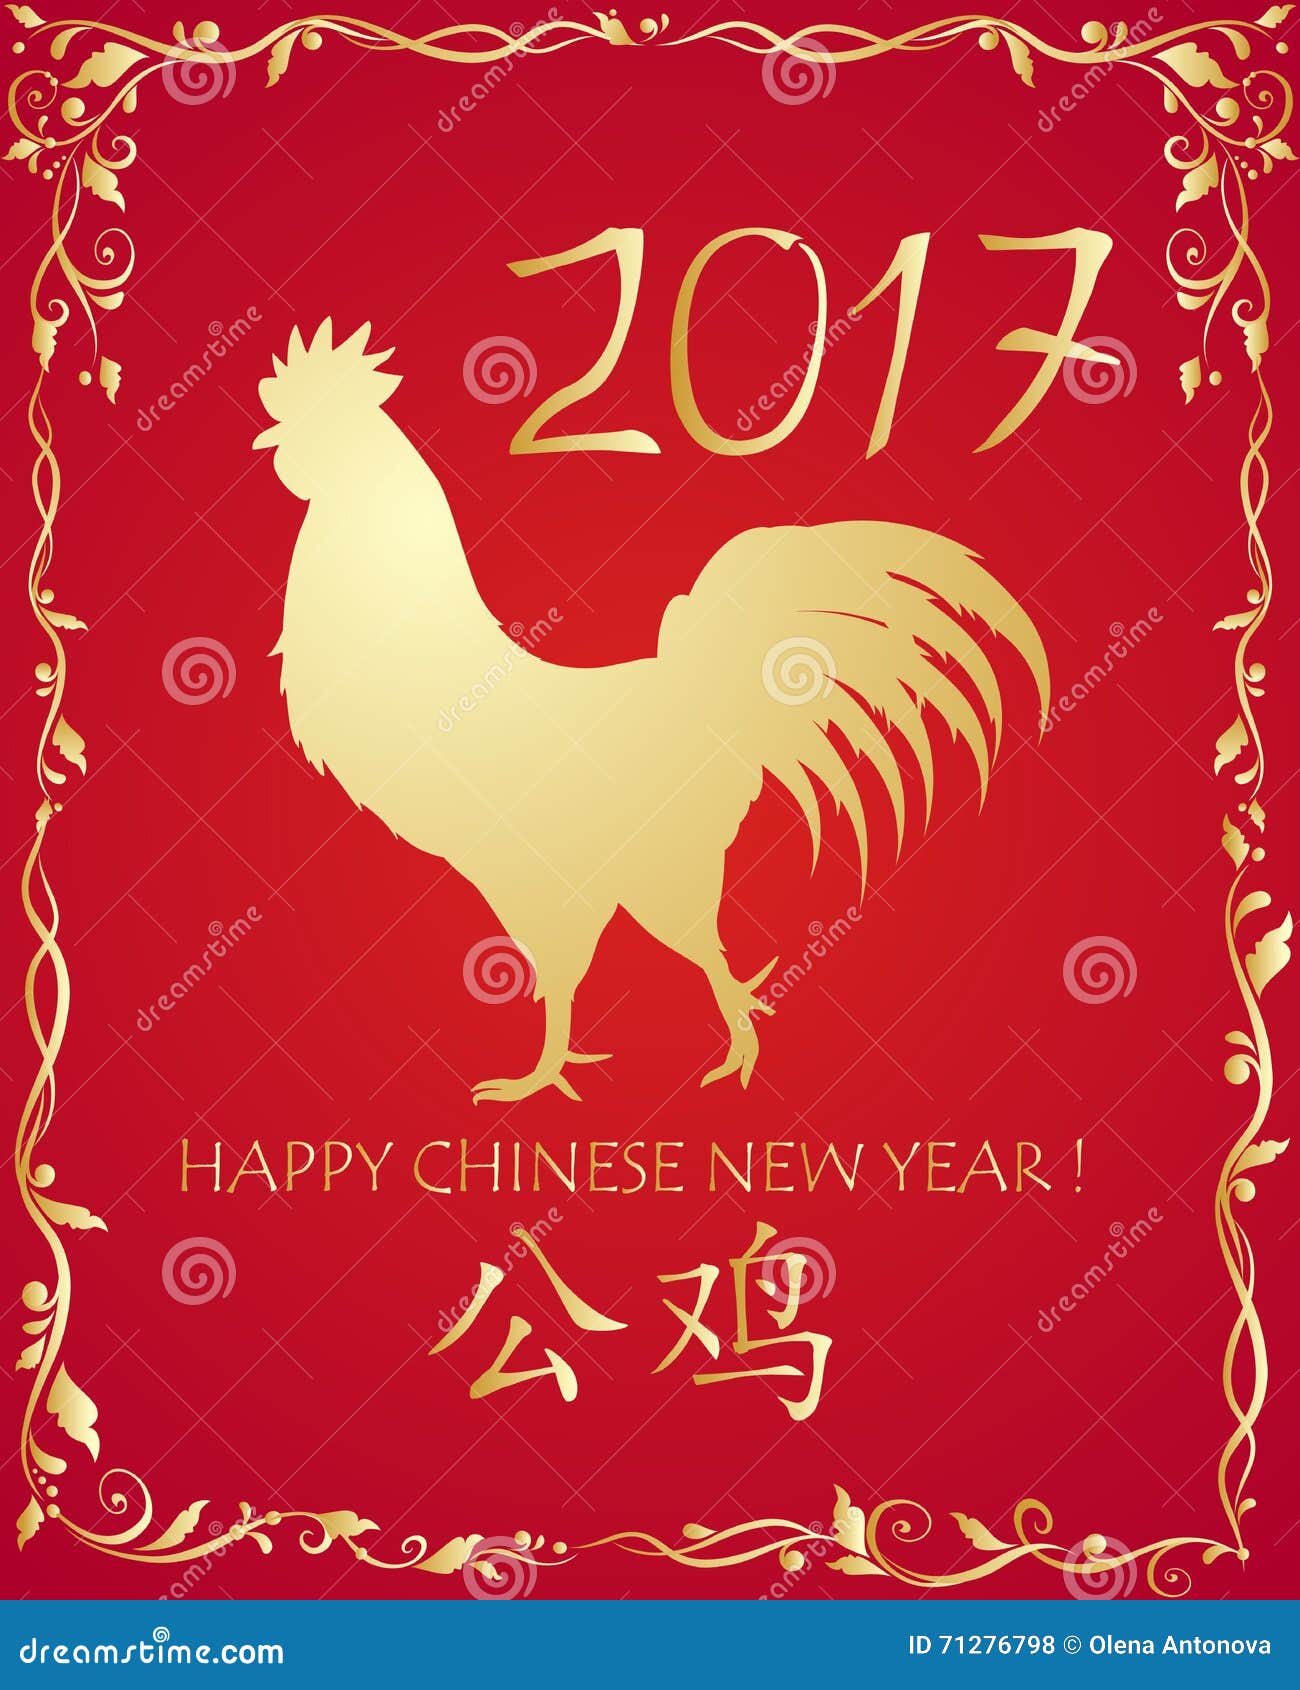 Greeting Card With Gold Rooster For Chinese New Year 2017 ...